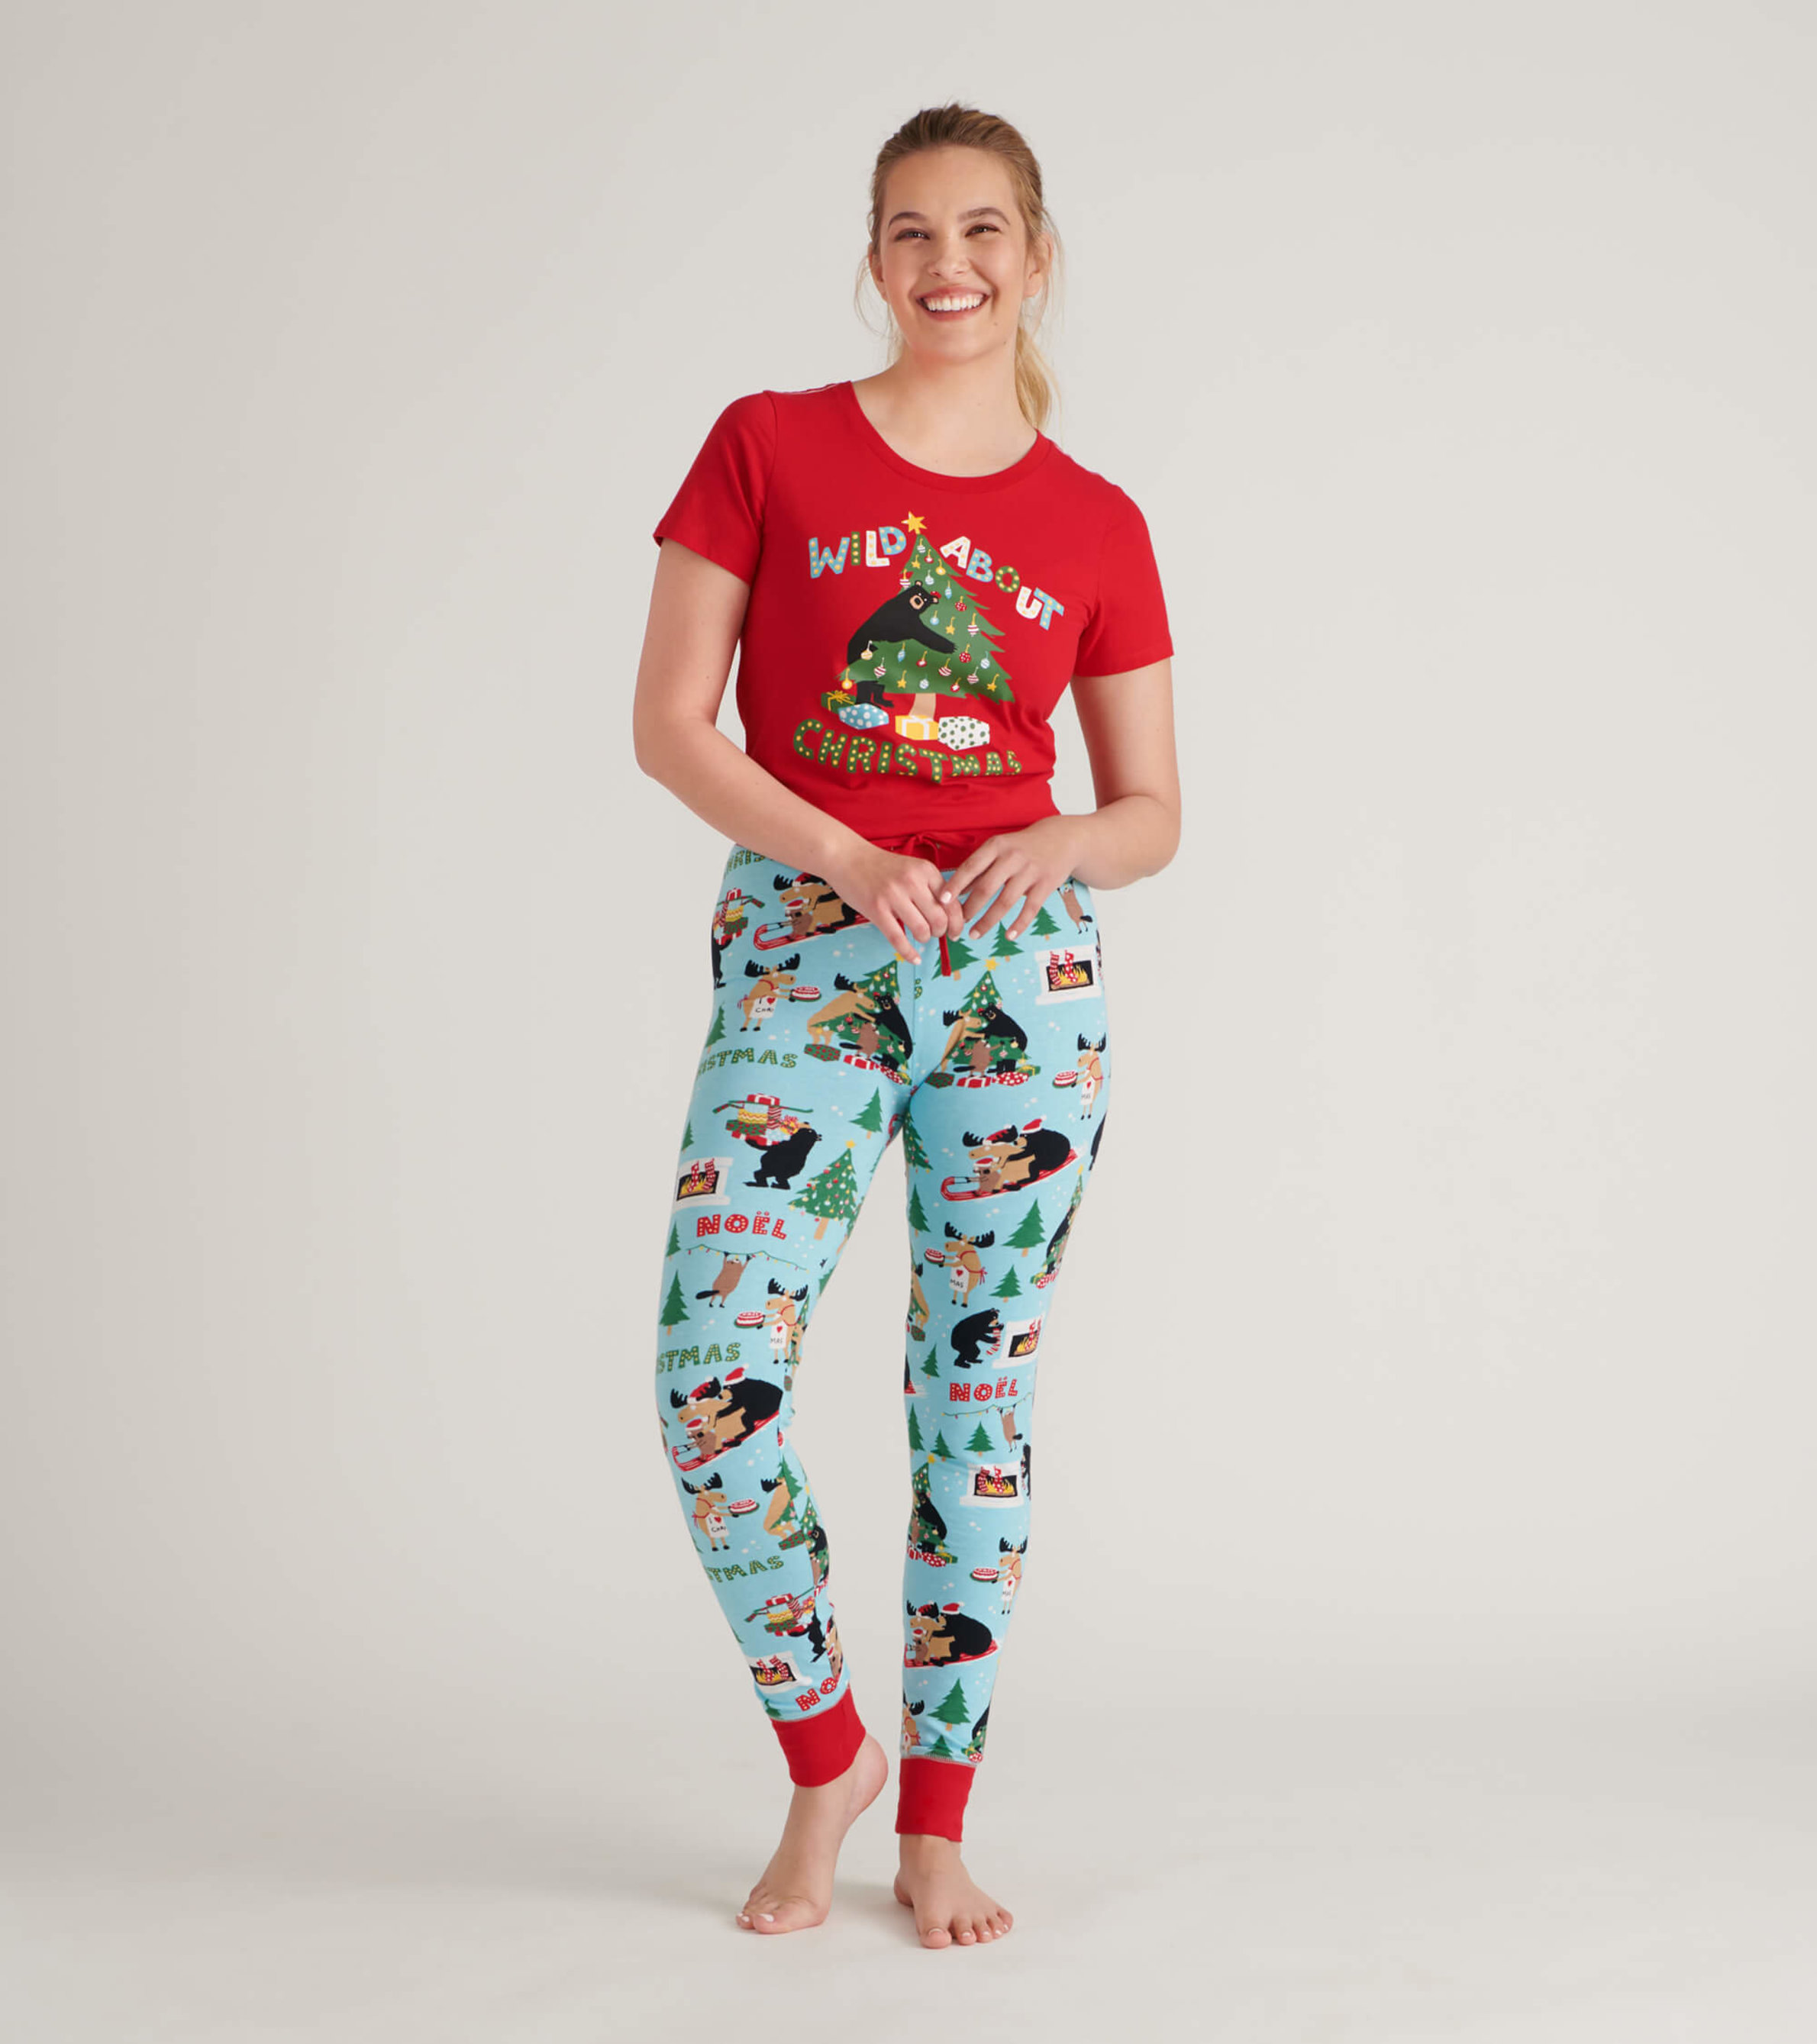 https://cdn.littlebluehouse.com/product_images/wild-about-christmas-womens-tee-and-leggings-pajama-separates/GPF21LL005_jpg/pdp_zoom.jpg?c=1634922713&locale=us_en